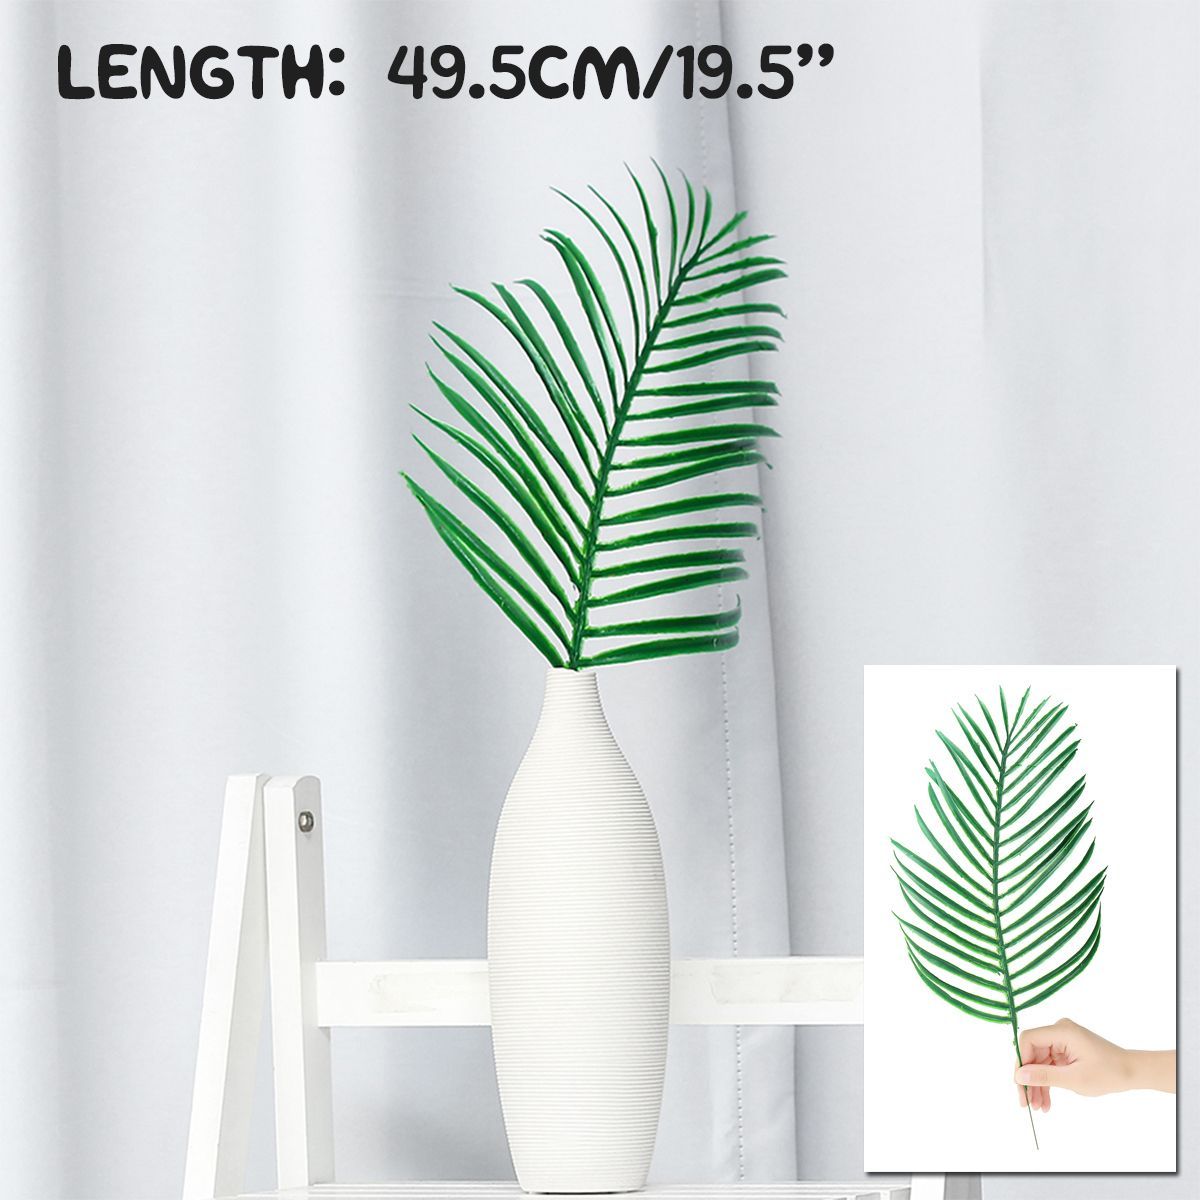 Artificial-Palm-Tree-Faux-Leaves-Green-Plants-Greenery-for-Flowers-Decorations-1497292